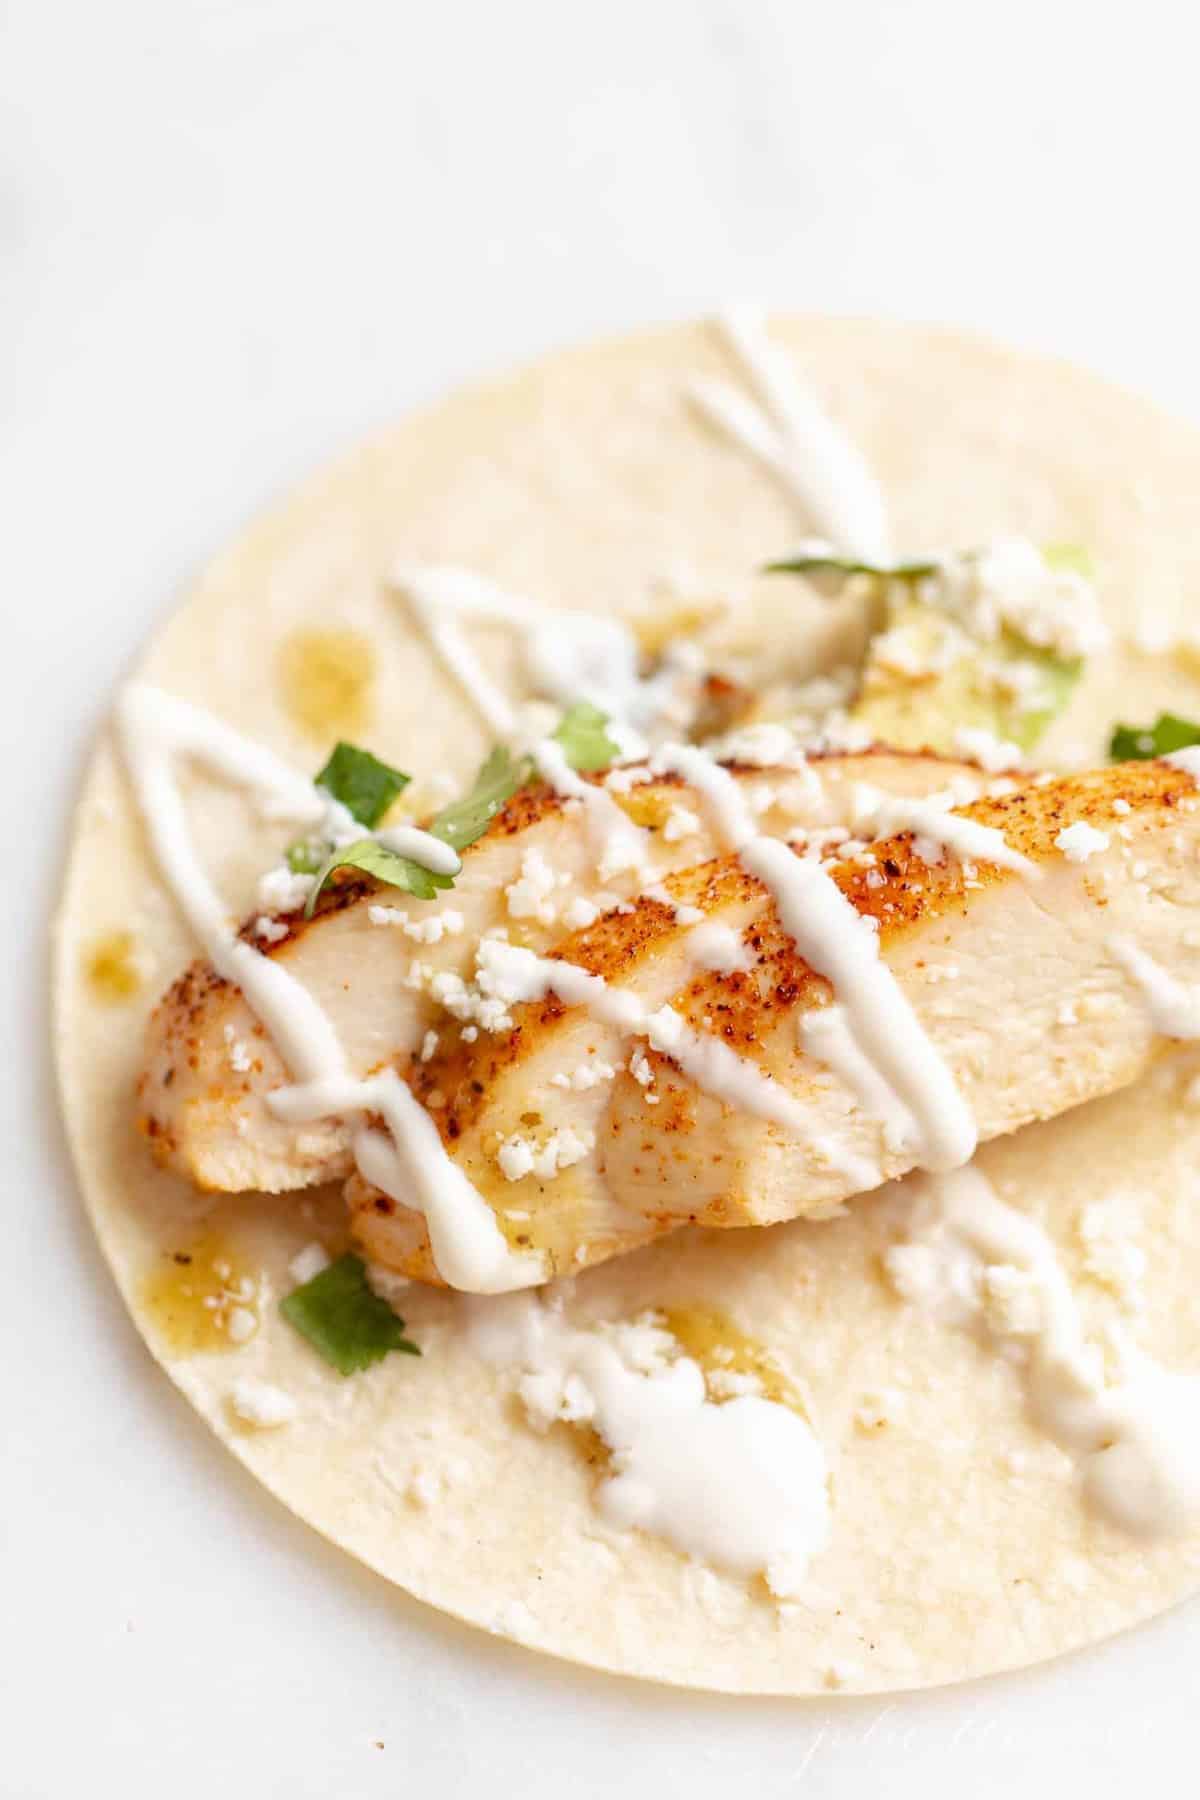 Close up of a corn tortilla filled with chicken soft taco ingredients.